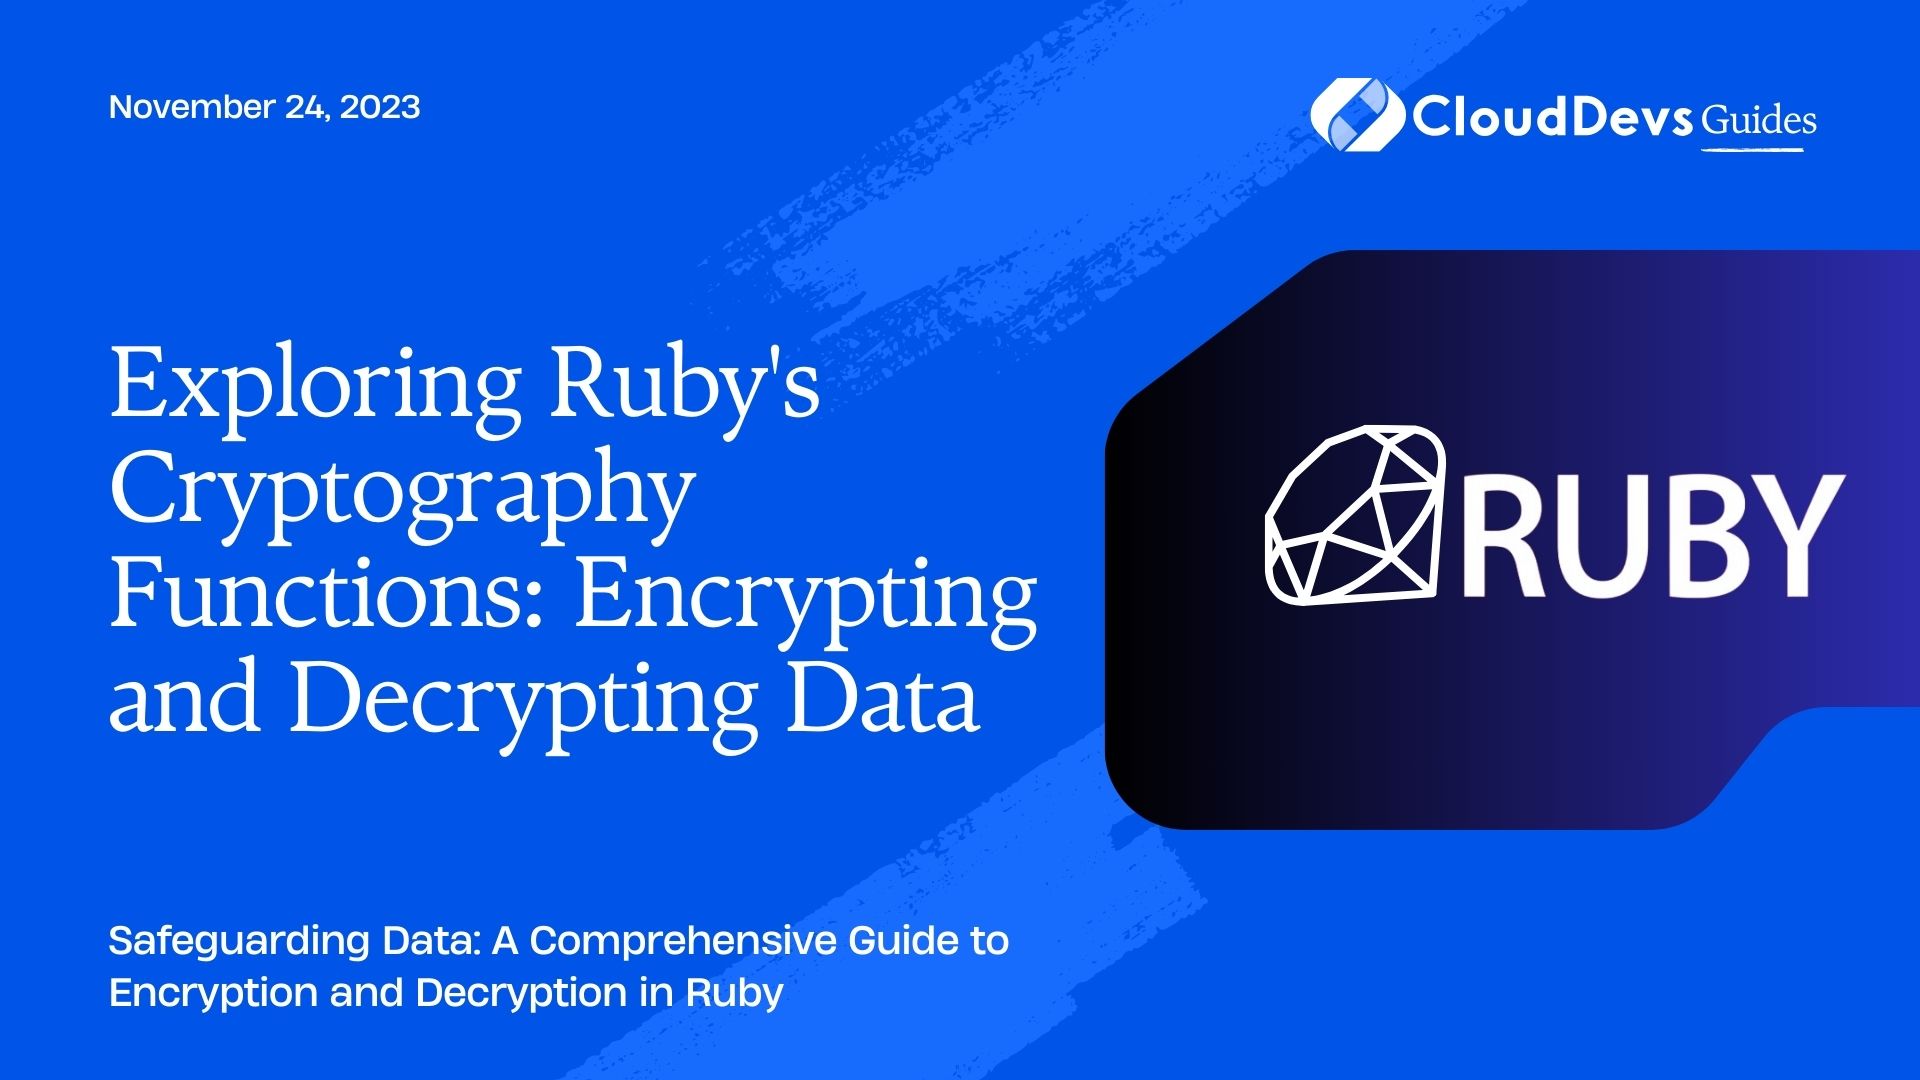 Exploring Ruby's Cryptography Functions: Encrypting and Decrypting Data